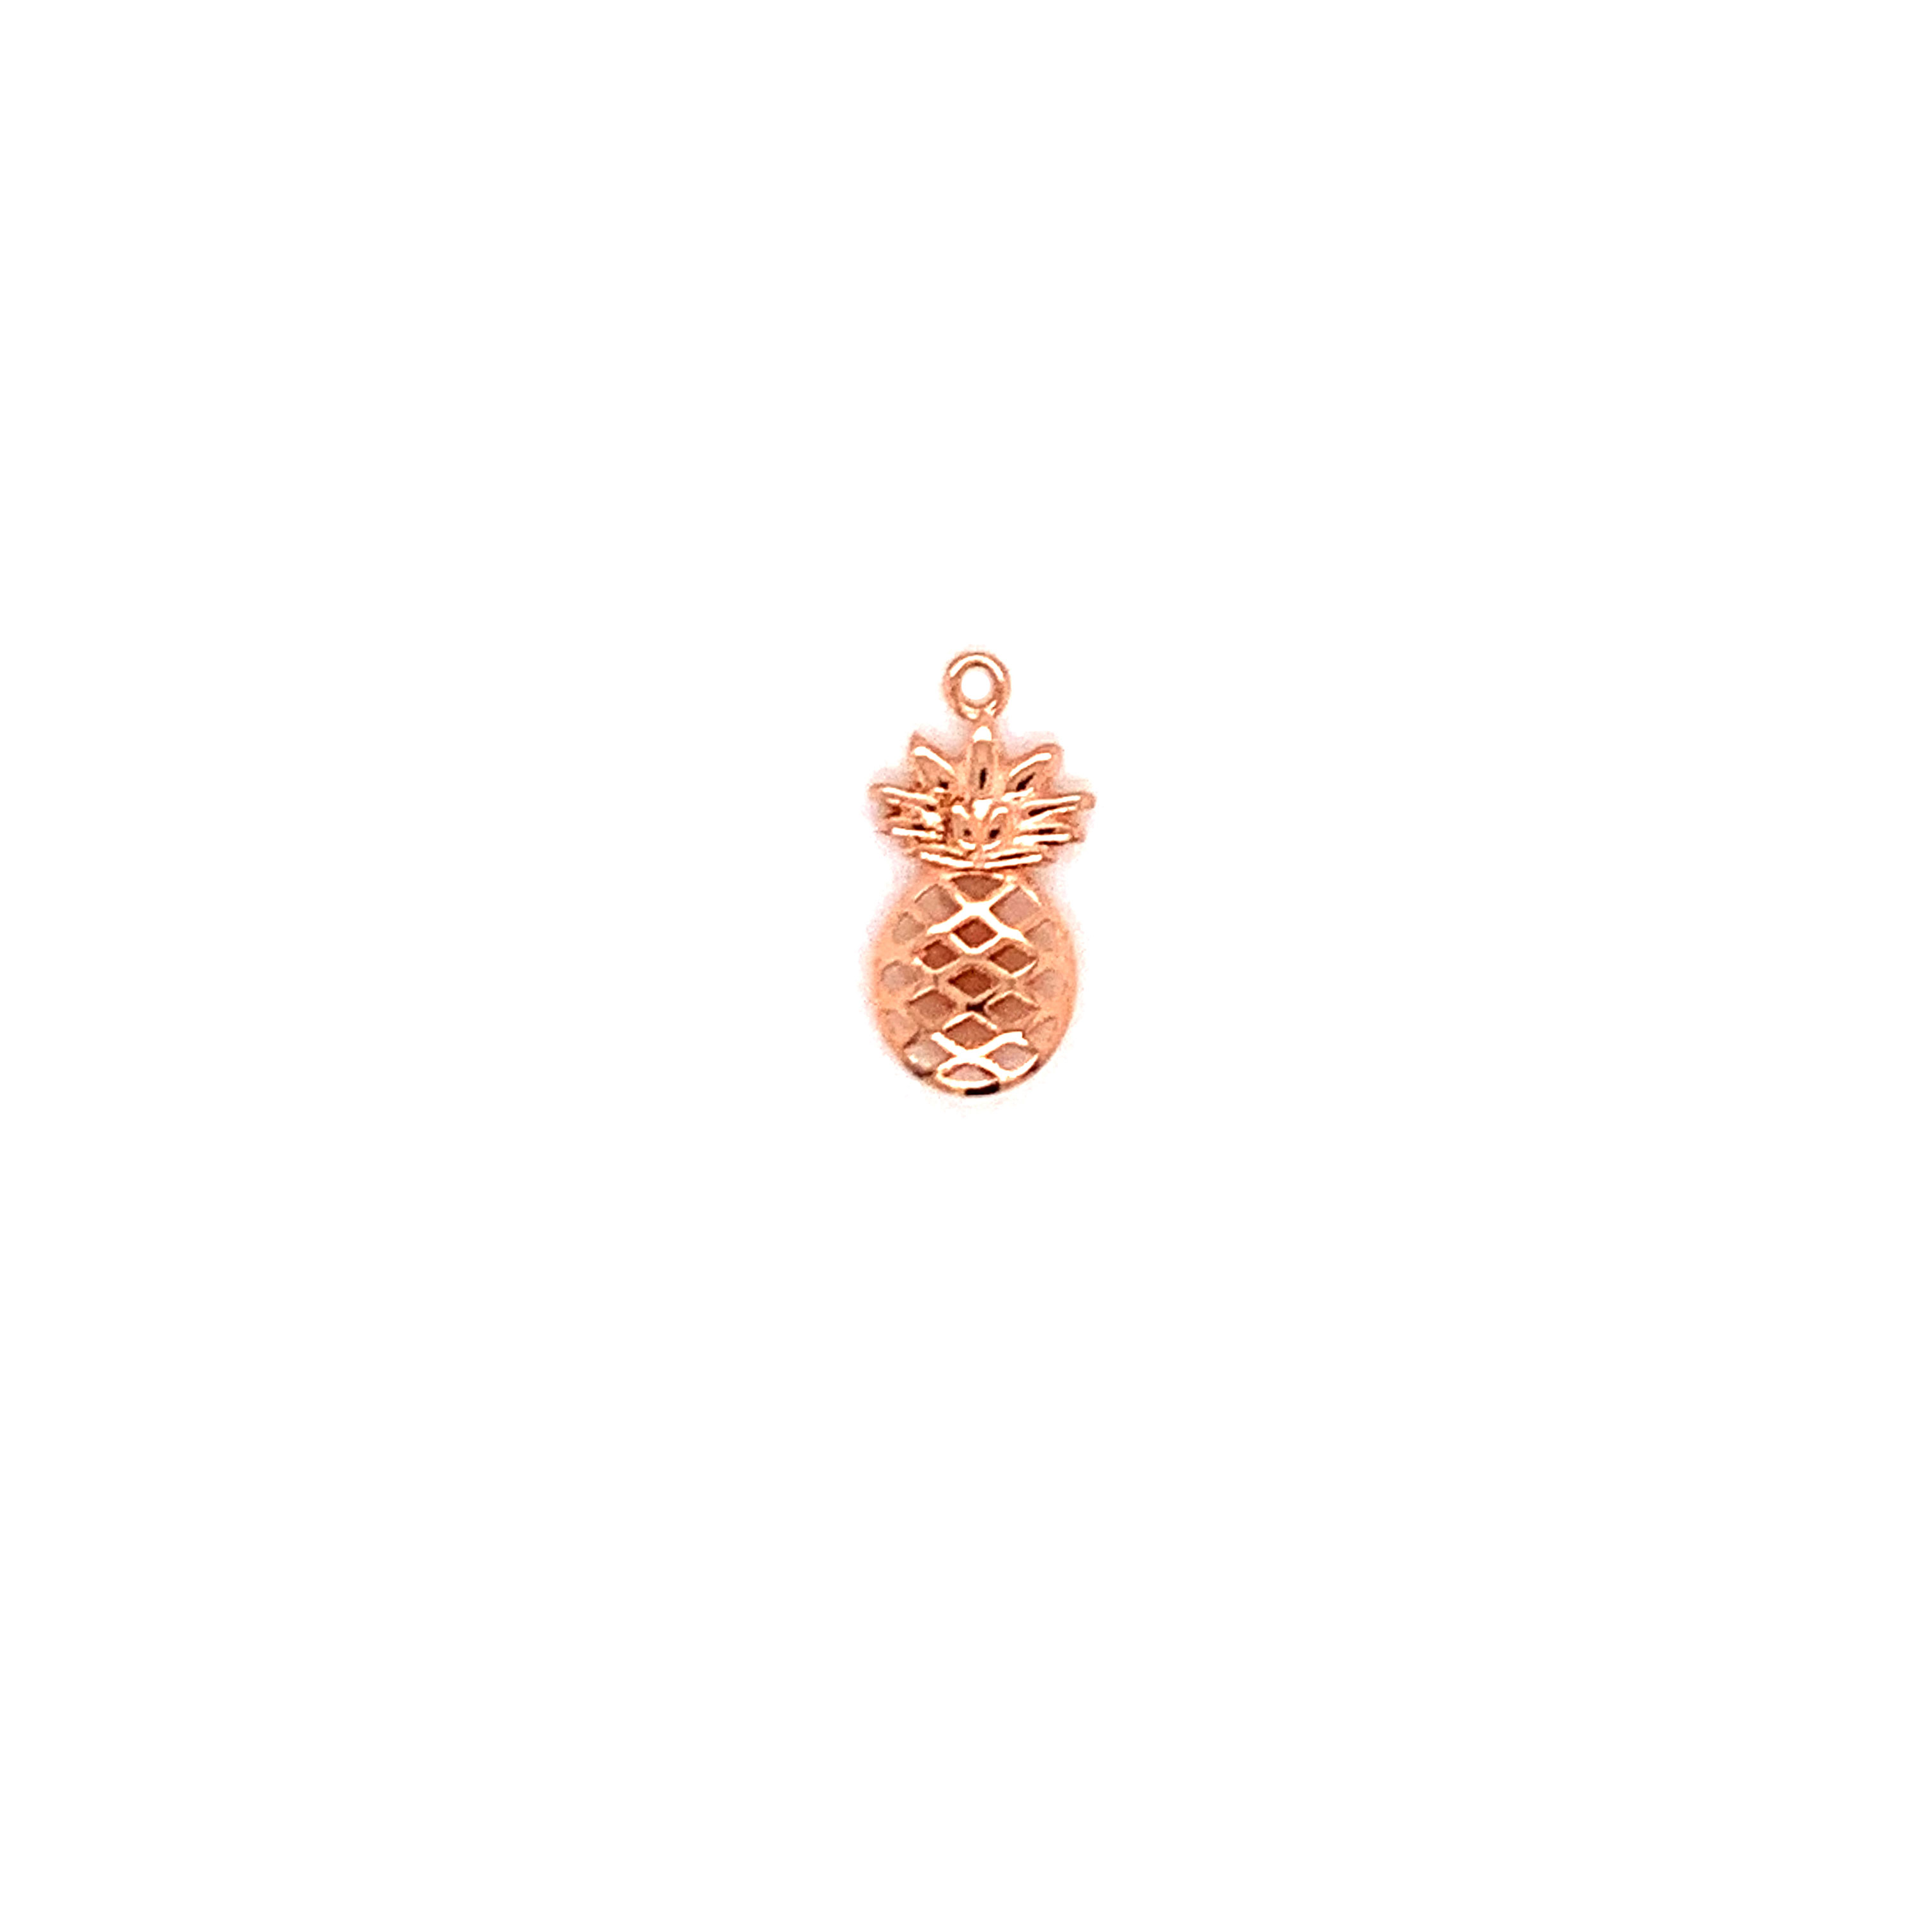 3D Pineapple Charm - Rose Gold Plated